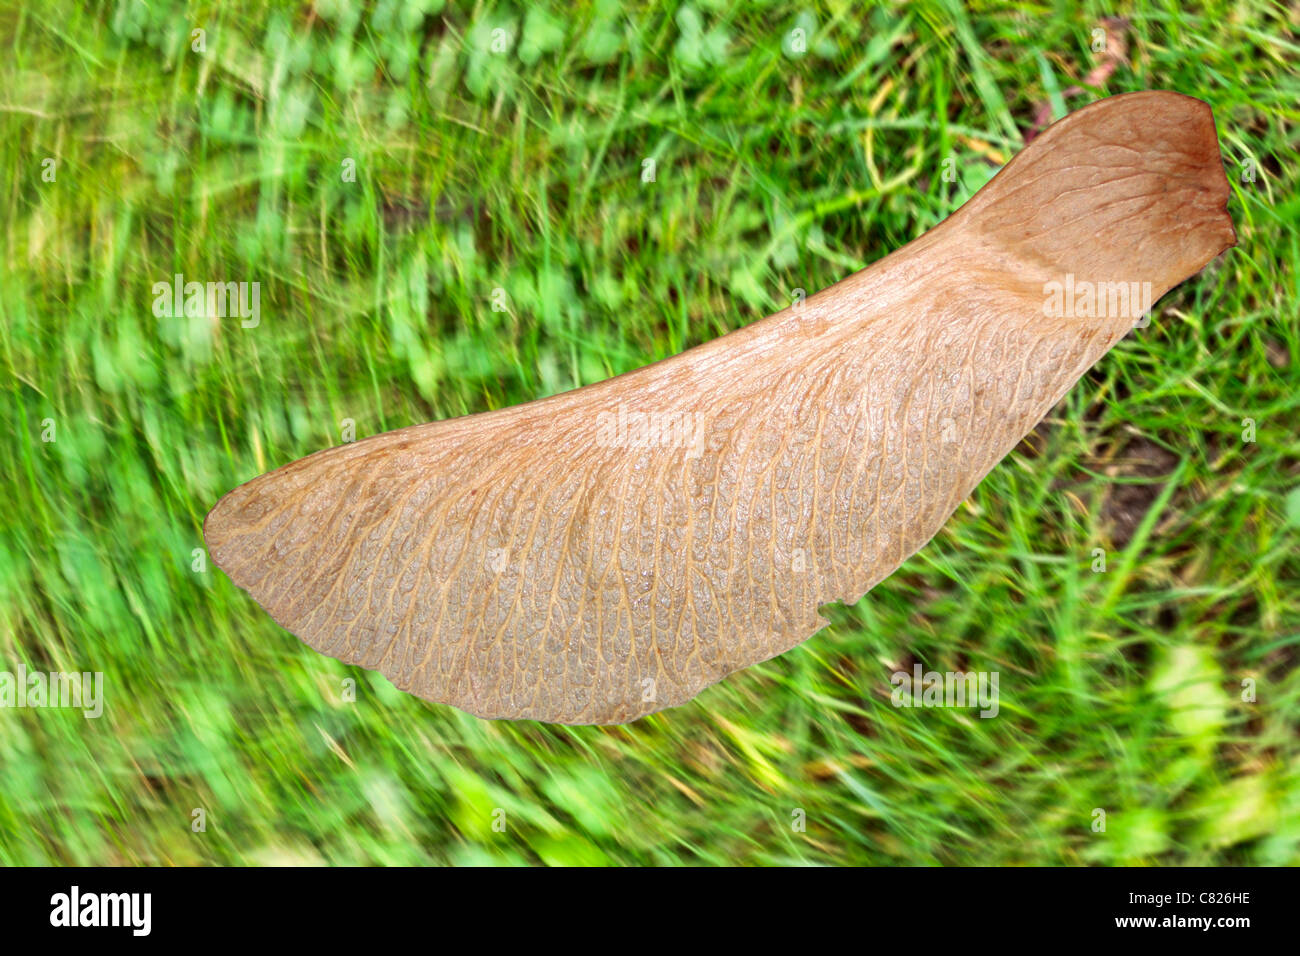 Maple Seed, Sycamore Seed appearing static against spinning background.  Flying sycamore seed.  Flying maple seed. Stock Photo